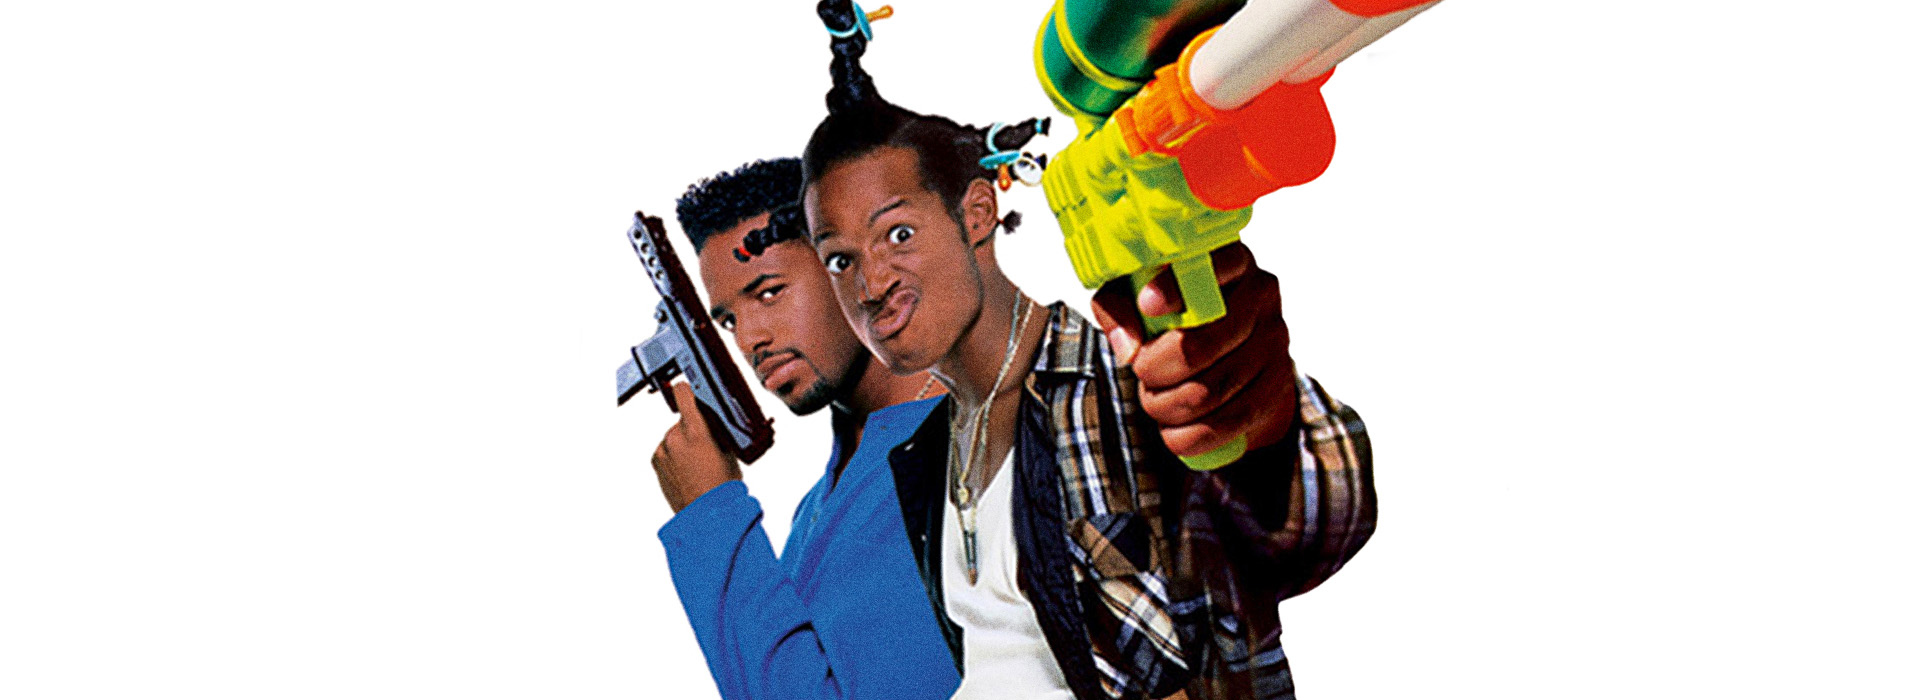 Movie poster Don't Be a Menace to South Central While Drinking Your Juice in the Hood